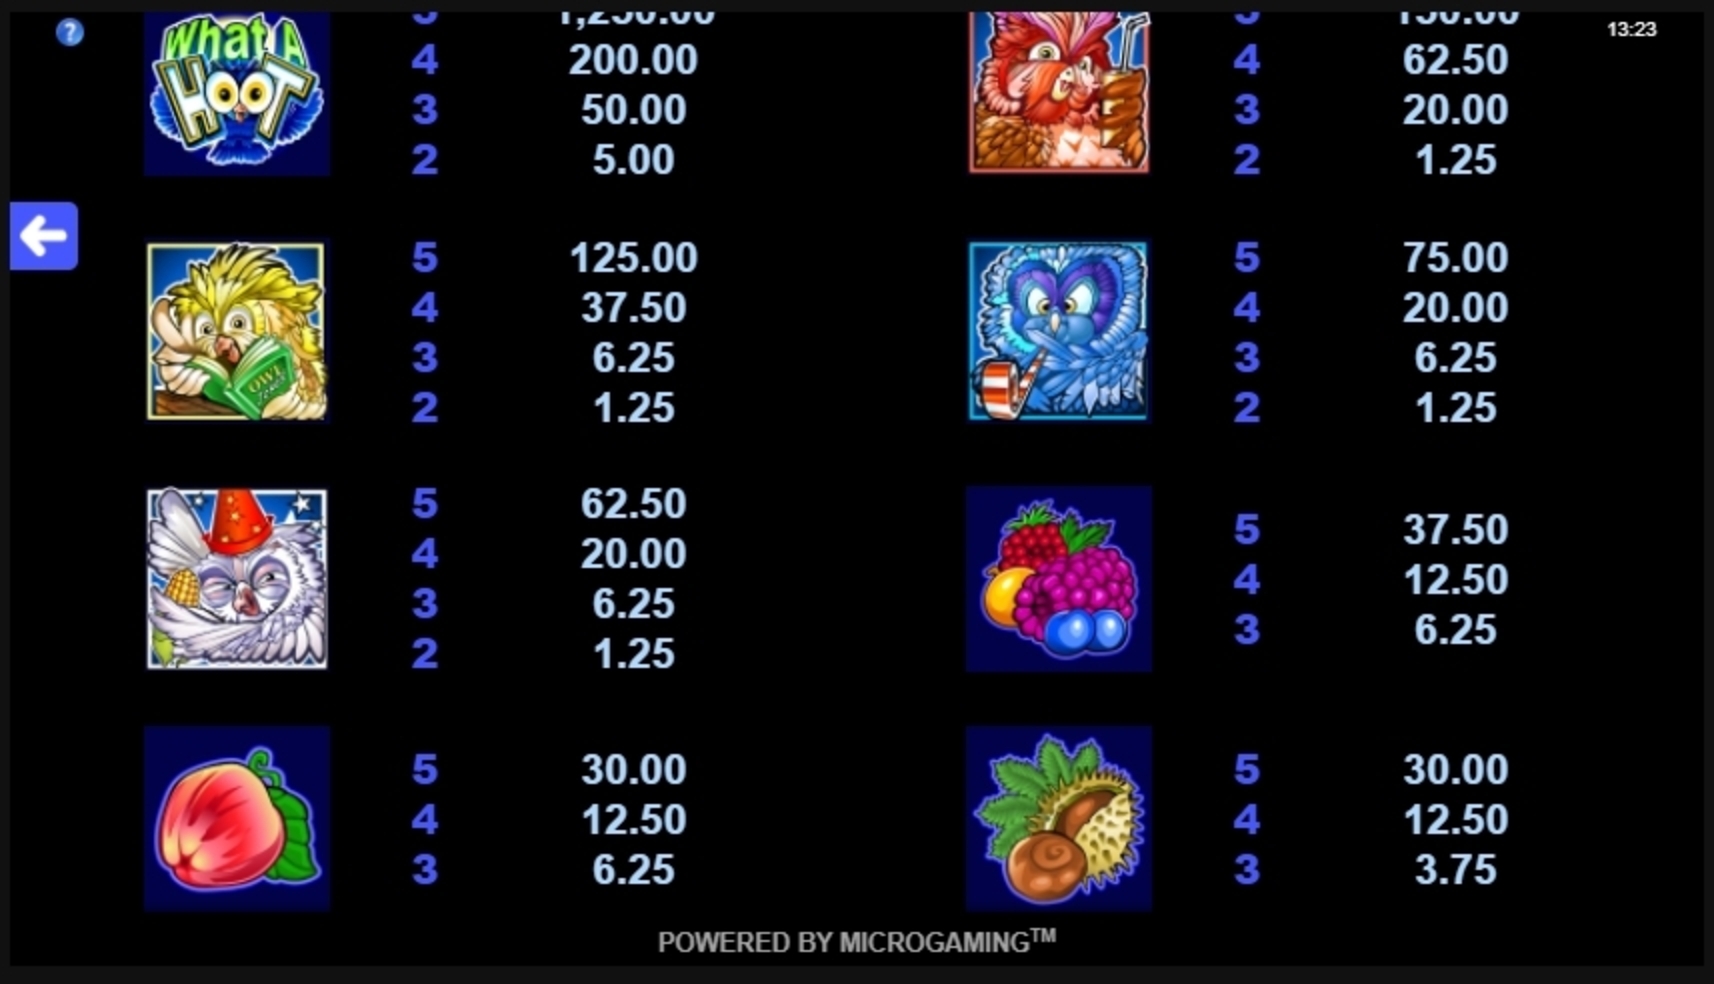 Info of What a Hoot Slot Game by Microgaming